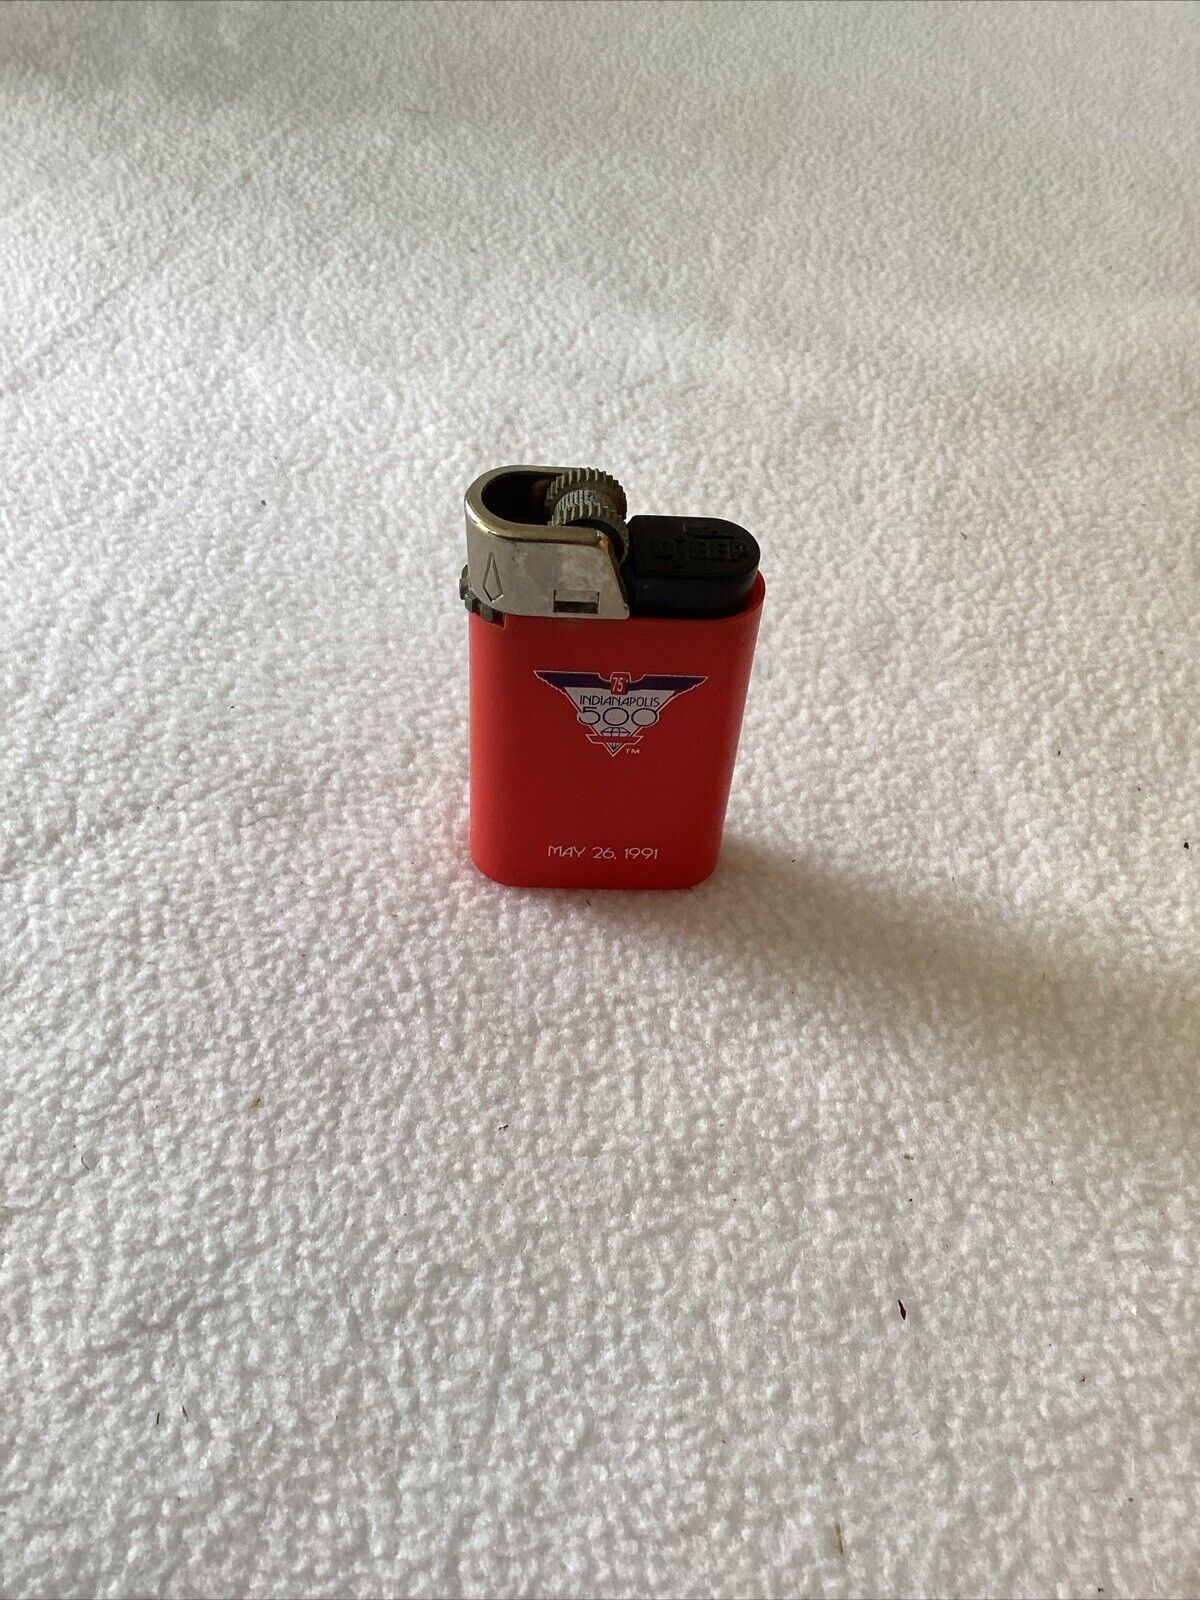 Vintage Indianapolis 75th Anniversary Lighter Preowned May 26 1991